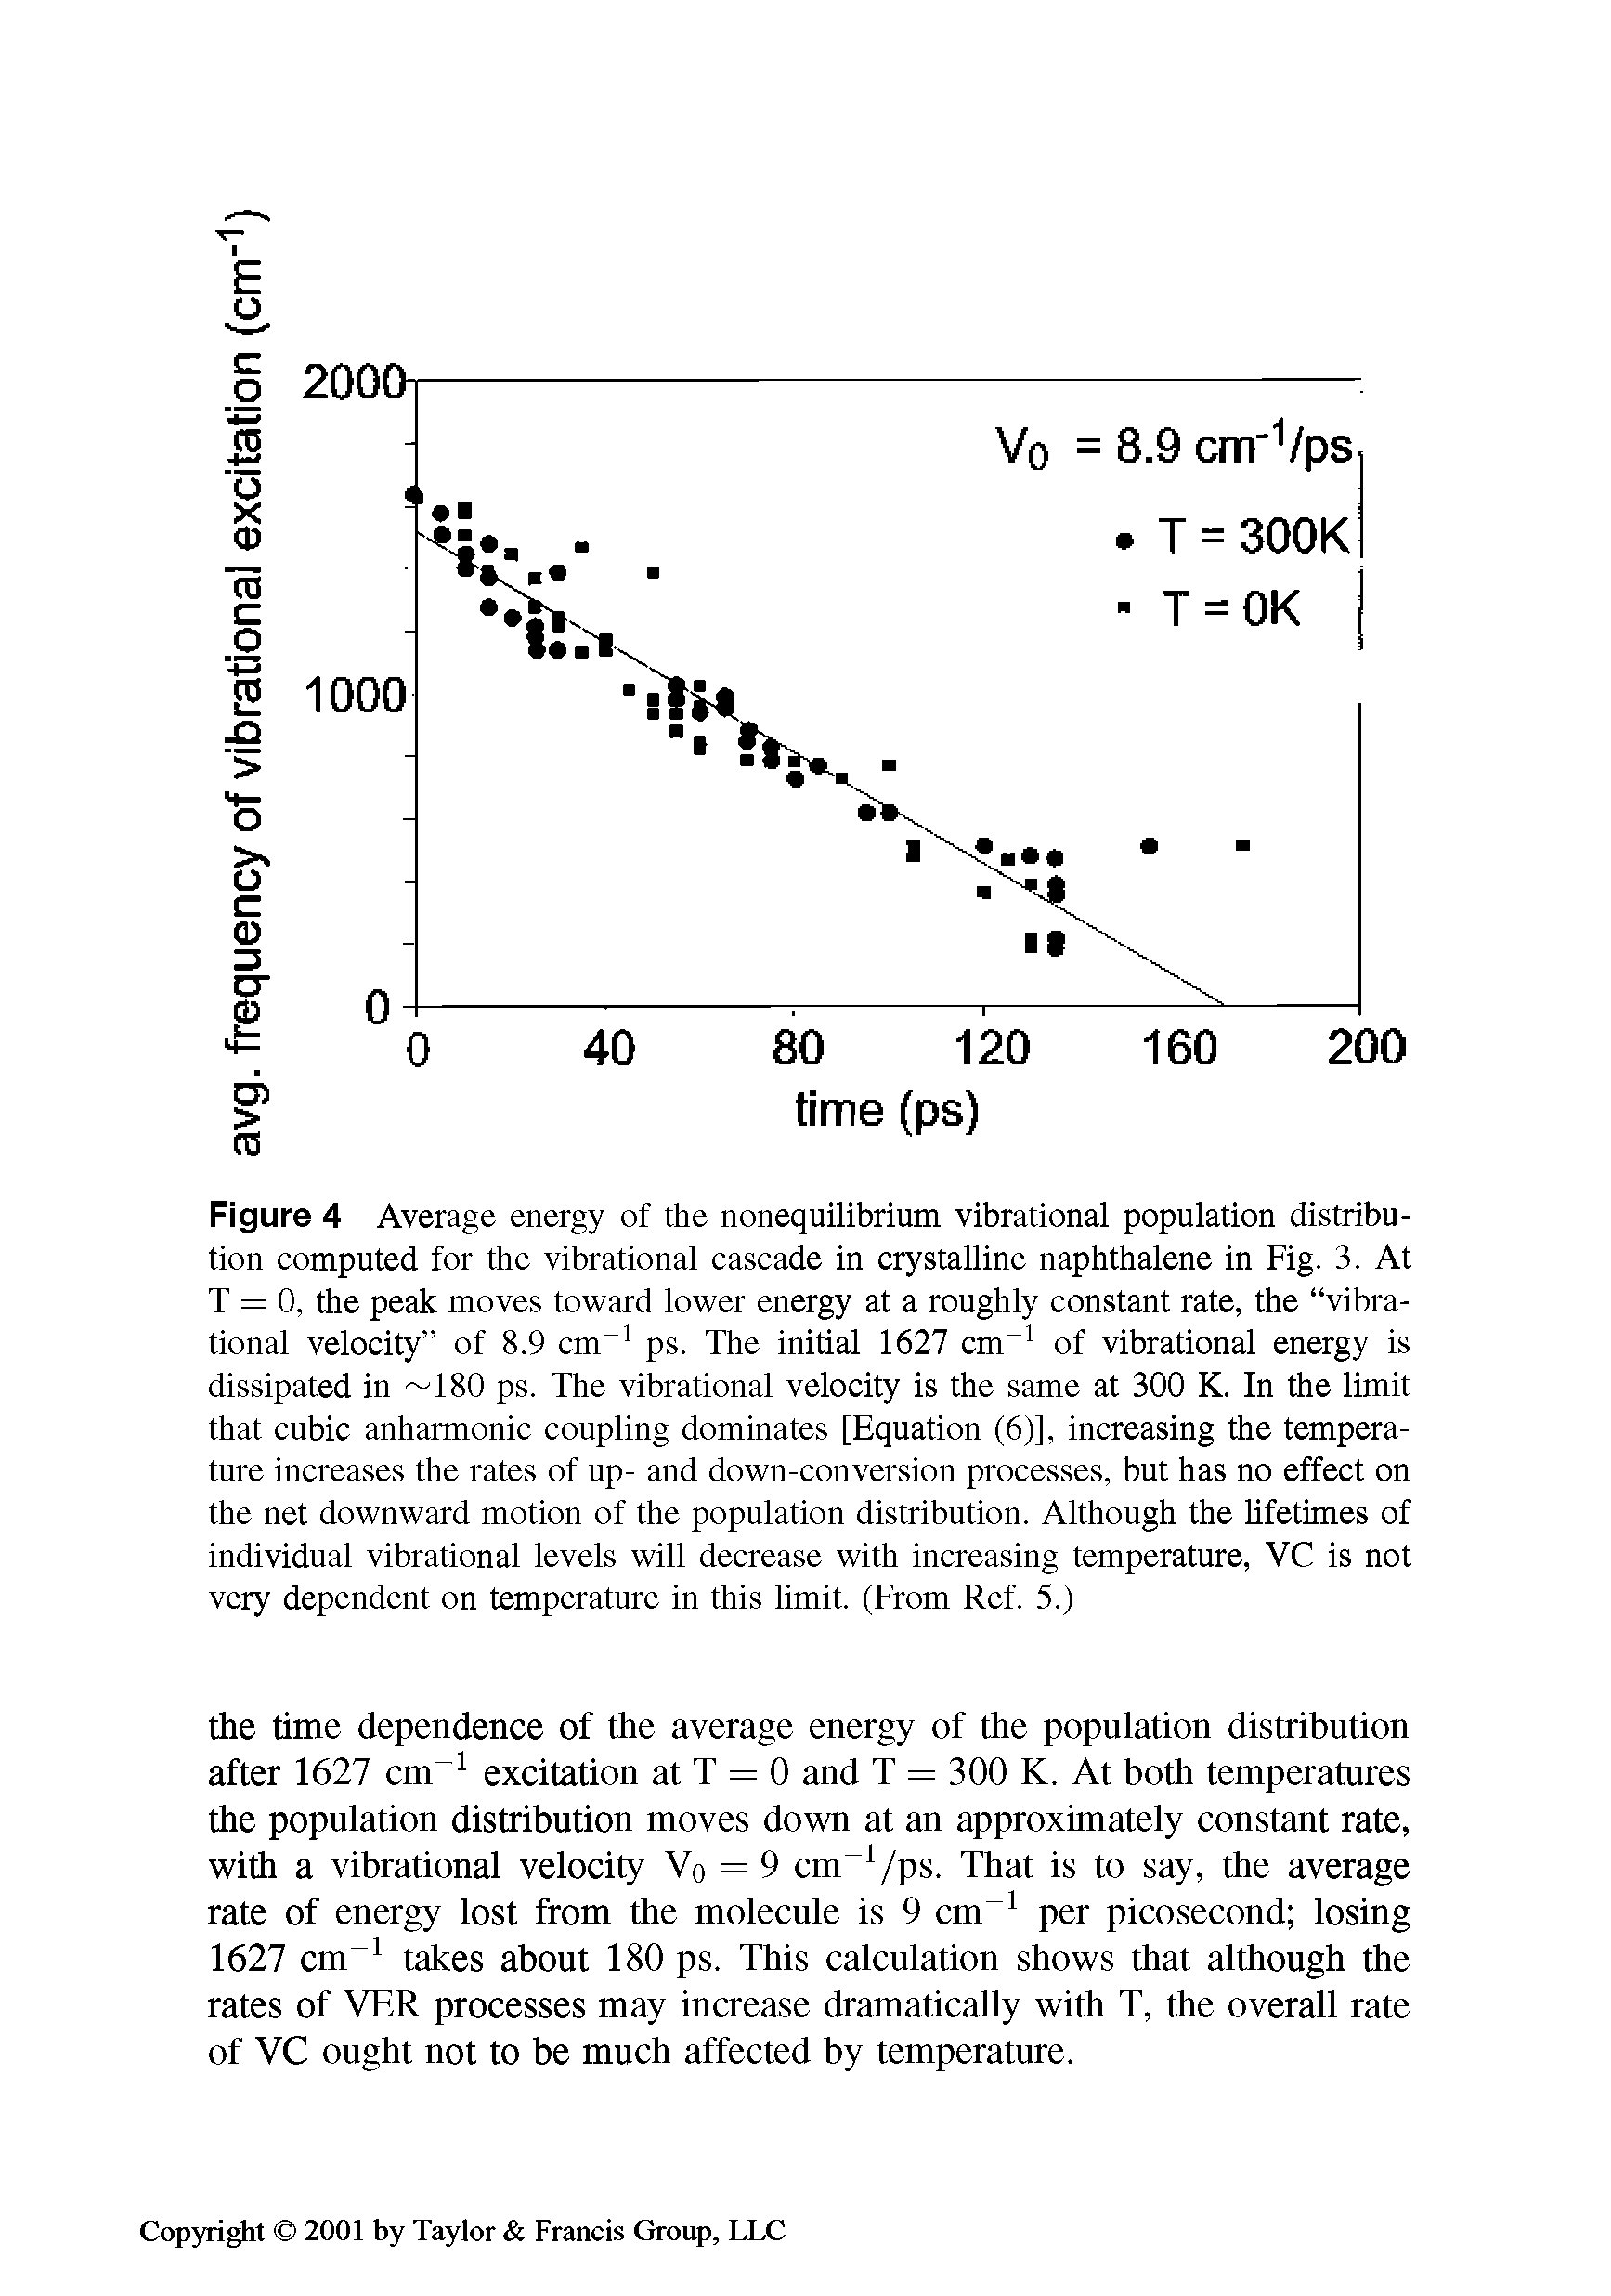 Figure 4 Average energy of the nonequilibrium vibrational population distribution computed for the vibrational cascade in crystalline naphthalene in Fig. 3. At T = 0, the peak moves toward lower energy at a roughly constant rate, the vibrational velocity of 8.9 cm-1 ps. The initial 1627 cm-1 of vibrational energy is dissipated in 180 ps. The vibrational velocity is the same at 300 K. In the limit that cubic anharmonic coupling dominates [Equation (6)], increasing the temperature increases the rates of up- and down-conversion processes, but has no effect on the net downward motion of the population distribution. Although the lifetimes of individual vibrational levels will decrease with increasing temperature, VC is not very dependent on temperature in this limit. (From Ref. 5.)...